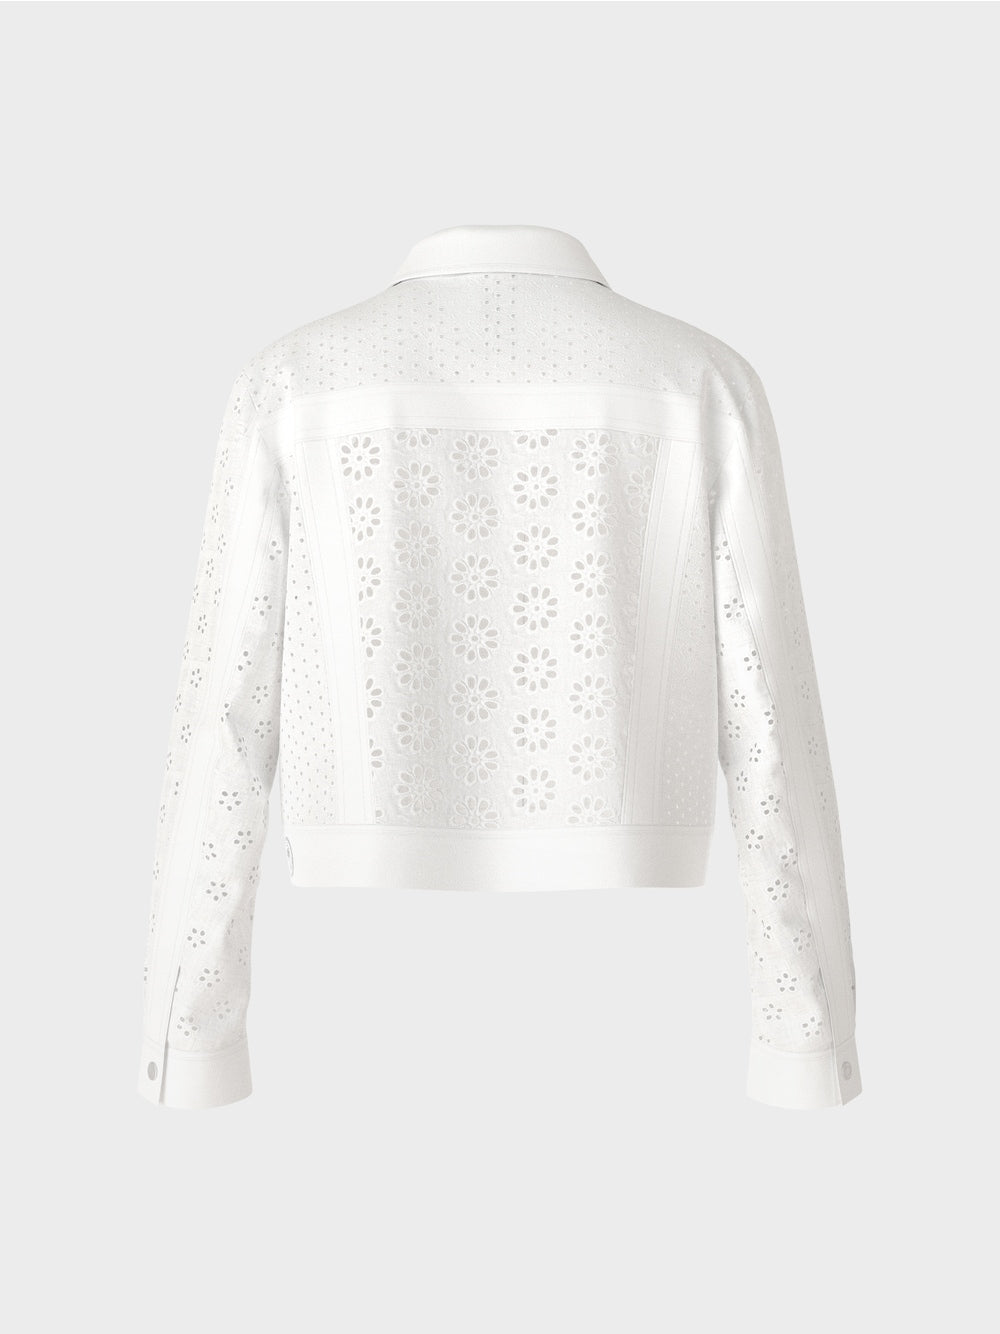 Marc Cain Sports Jacket with Eyelet Embroidery WS31.29W35 White